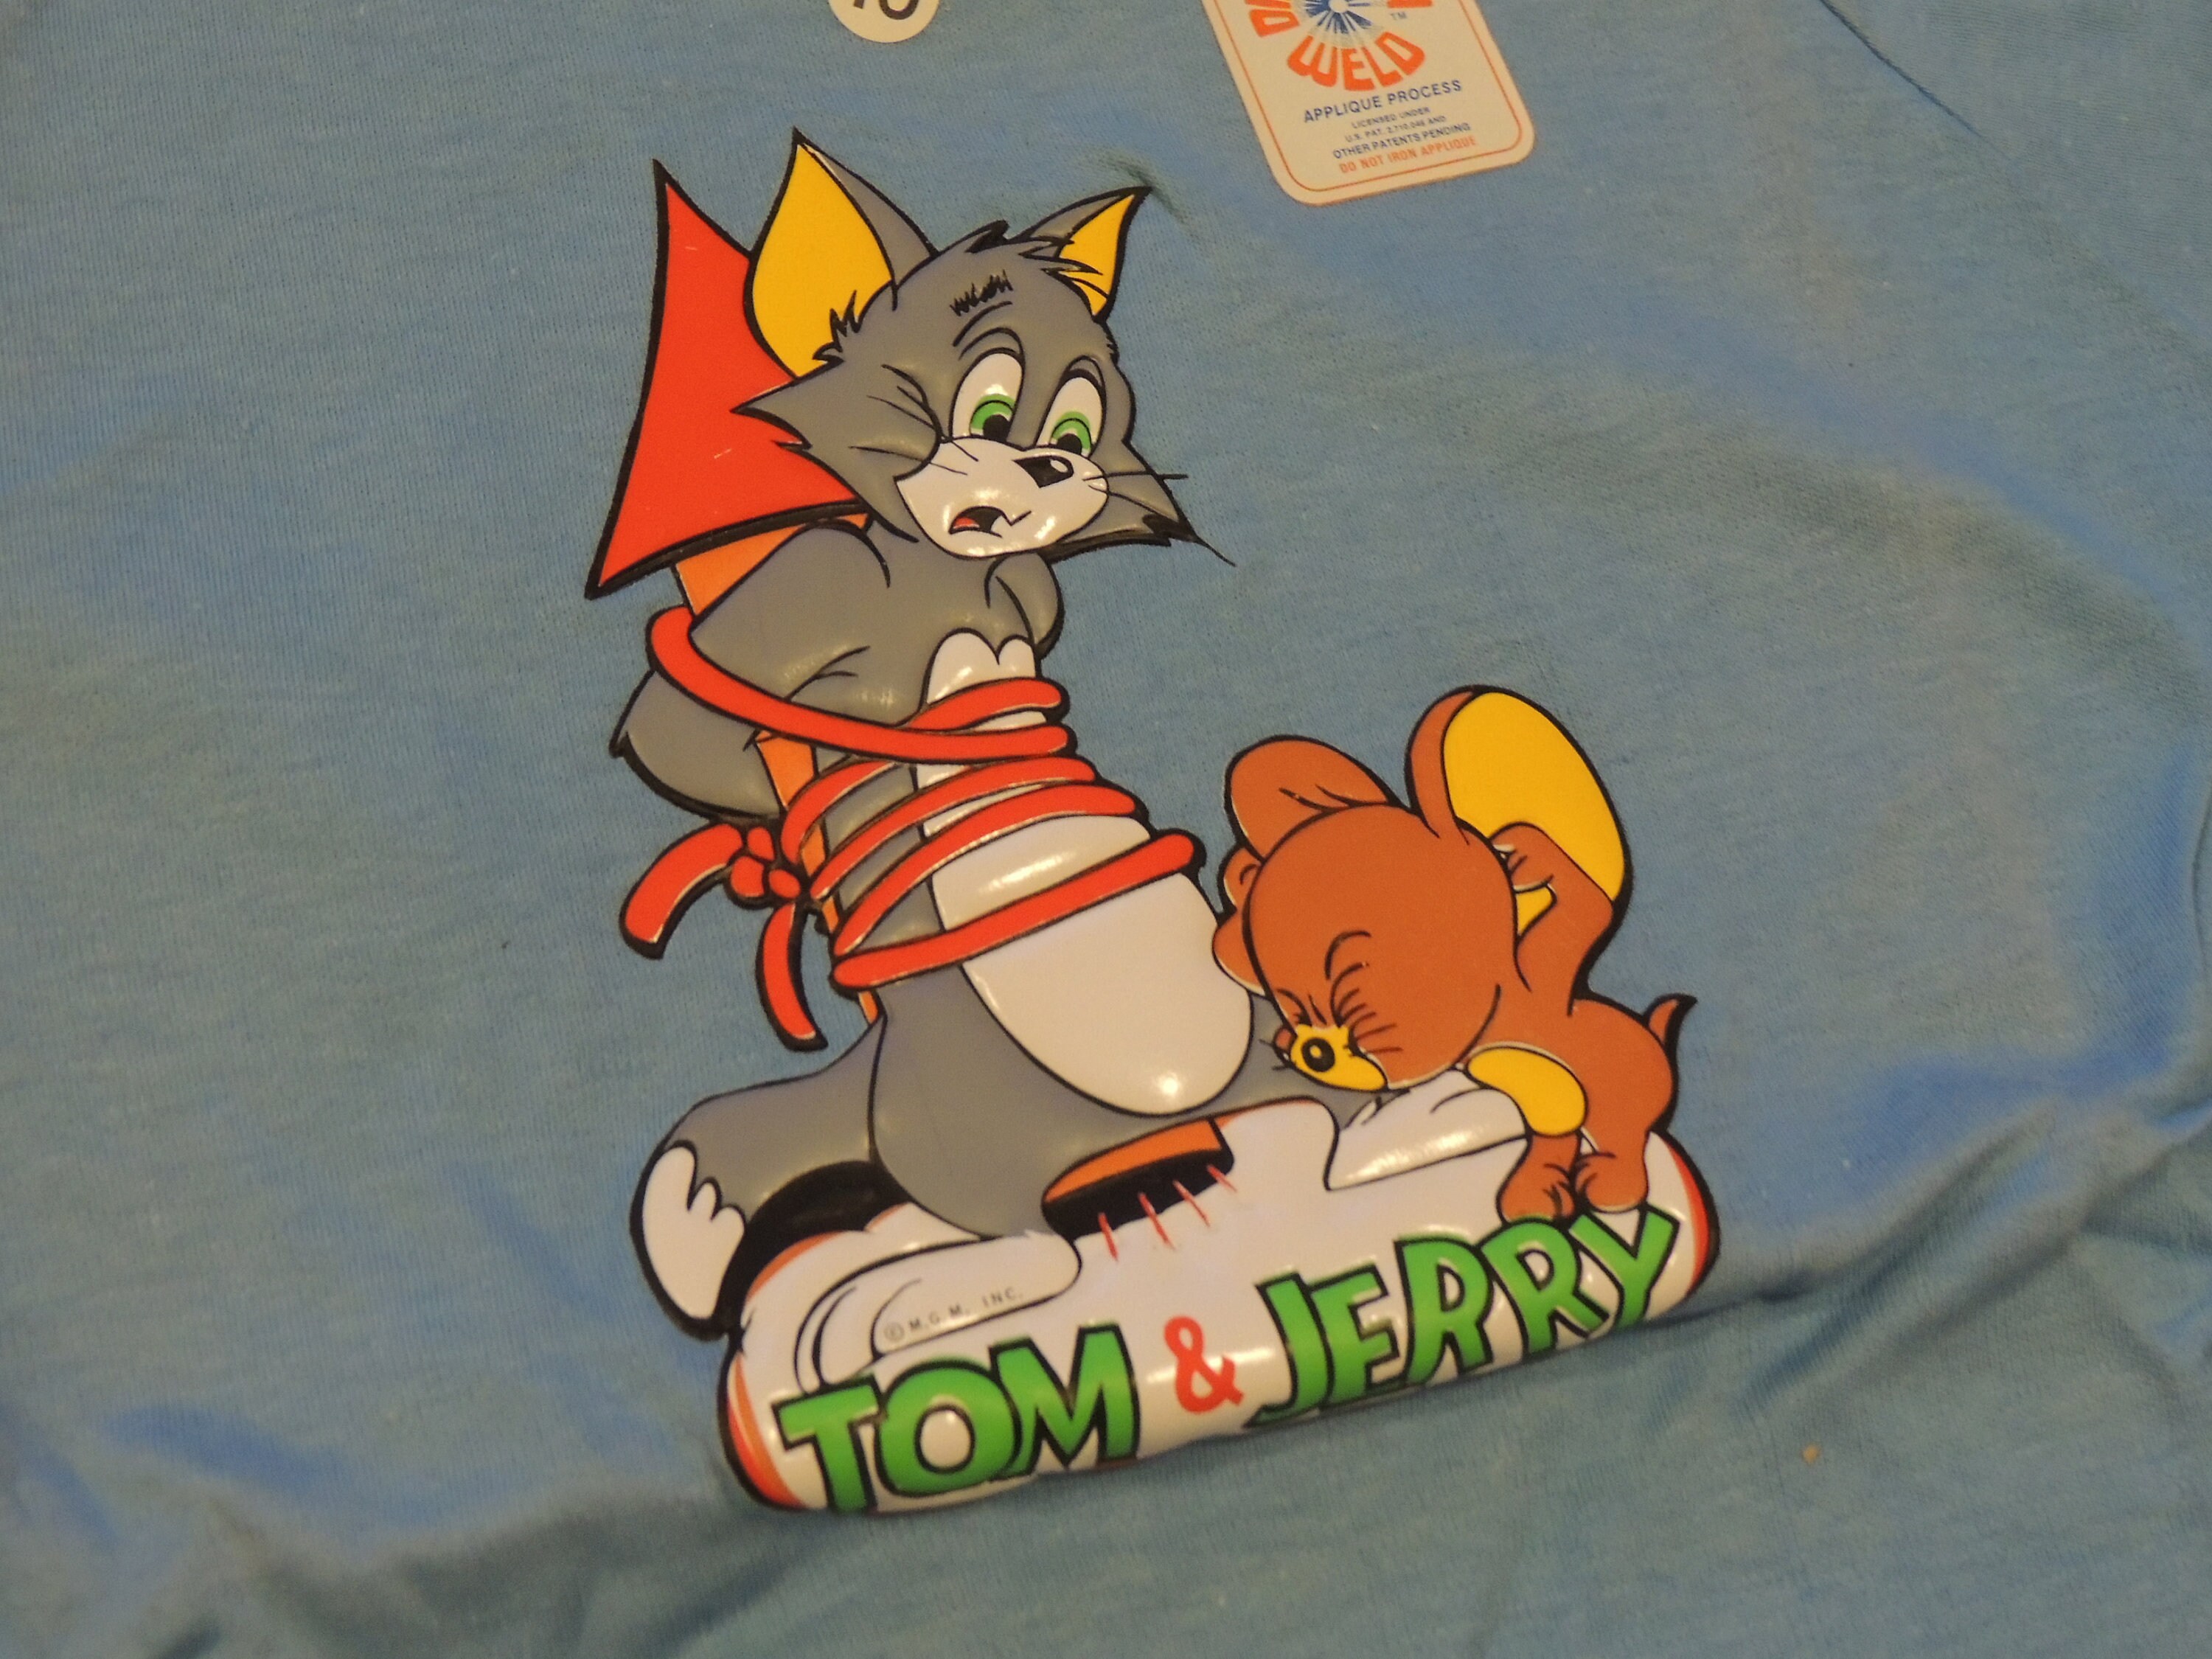 Mgm Tom Jerry - Etsy